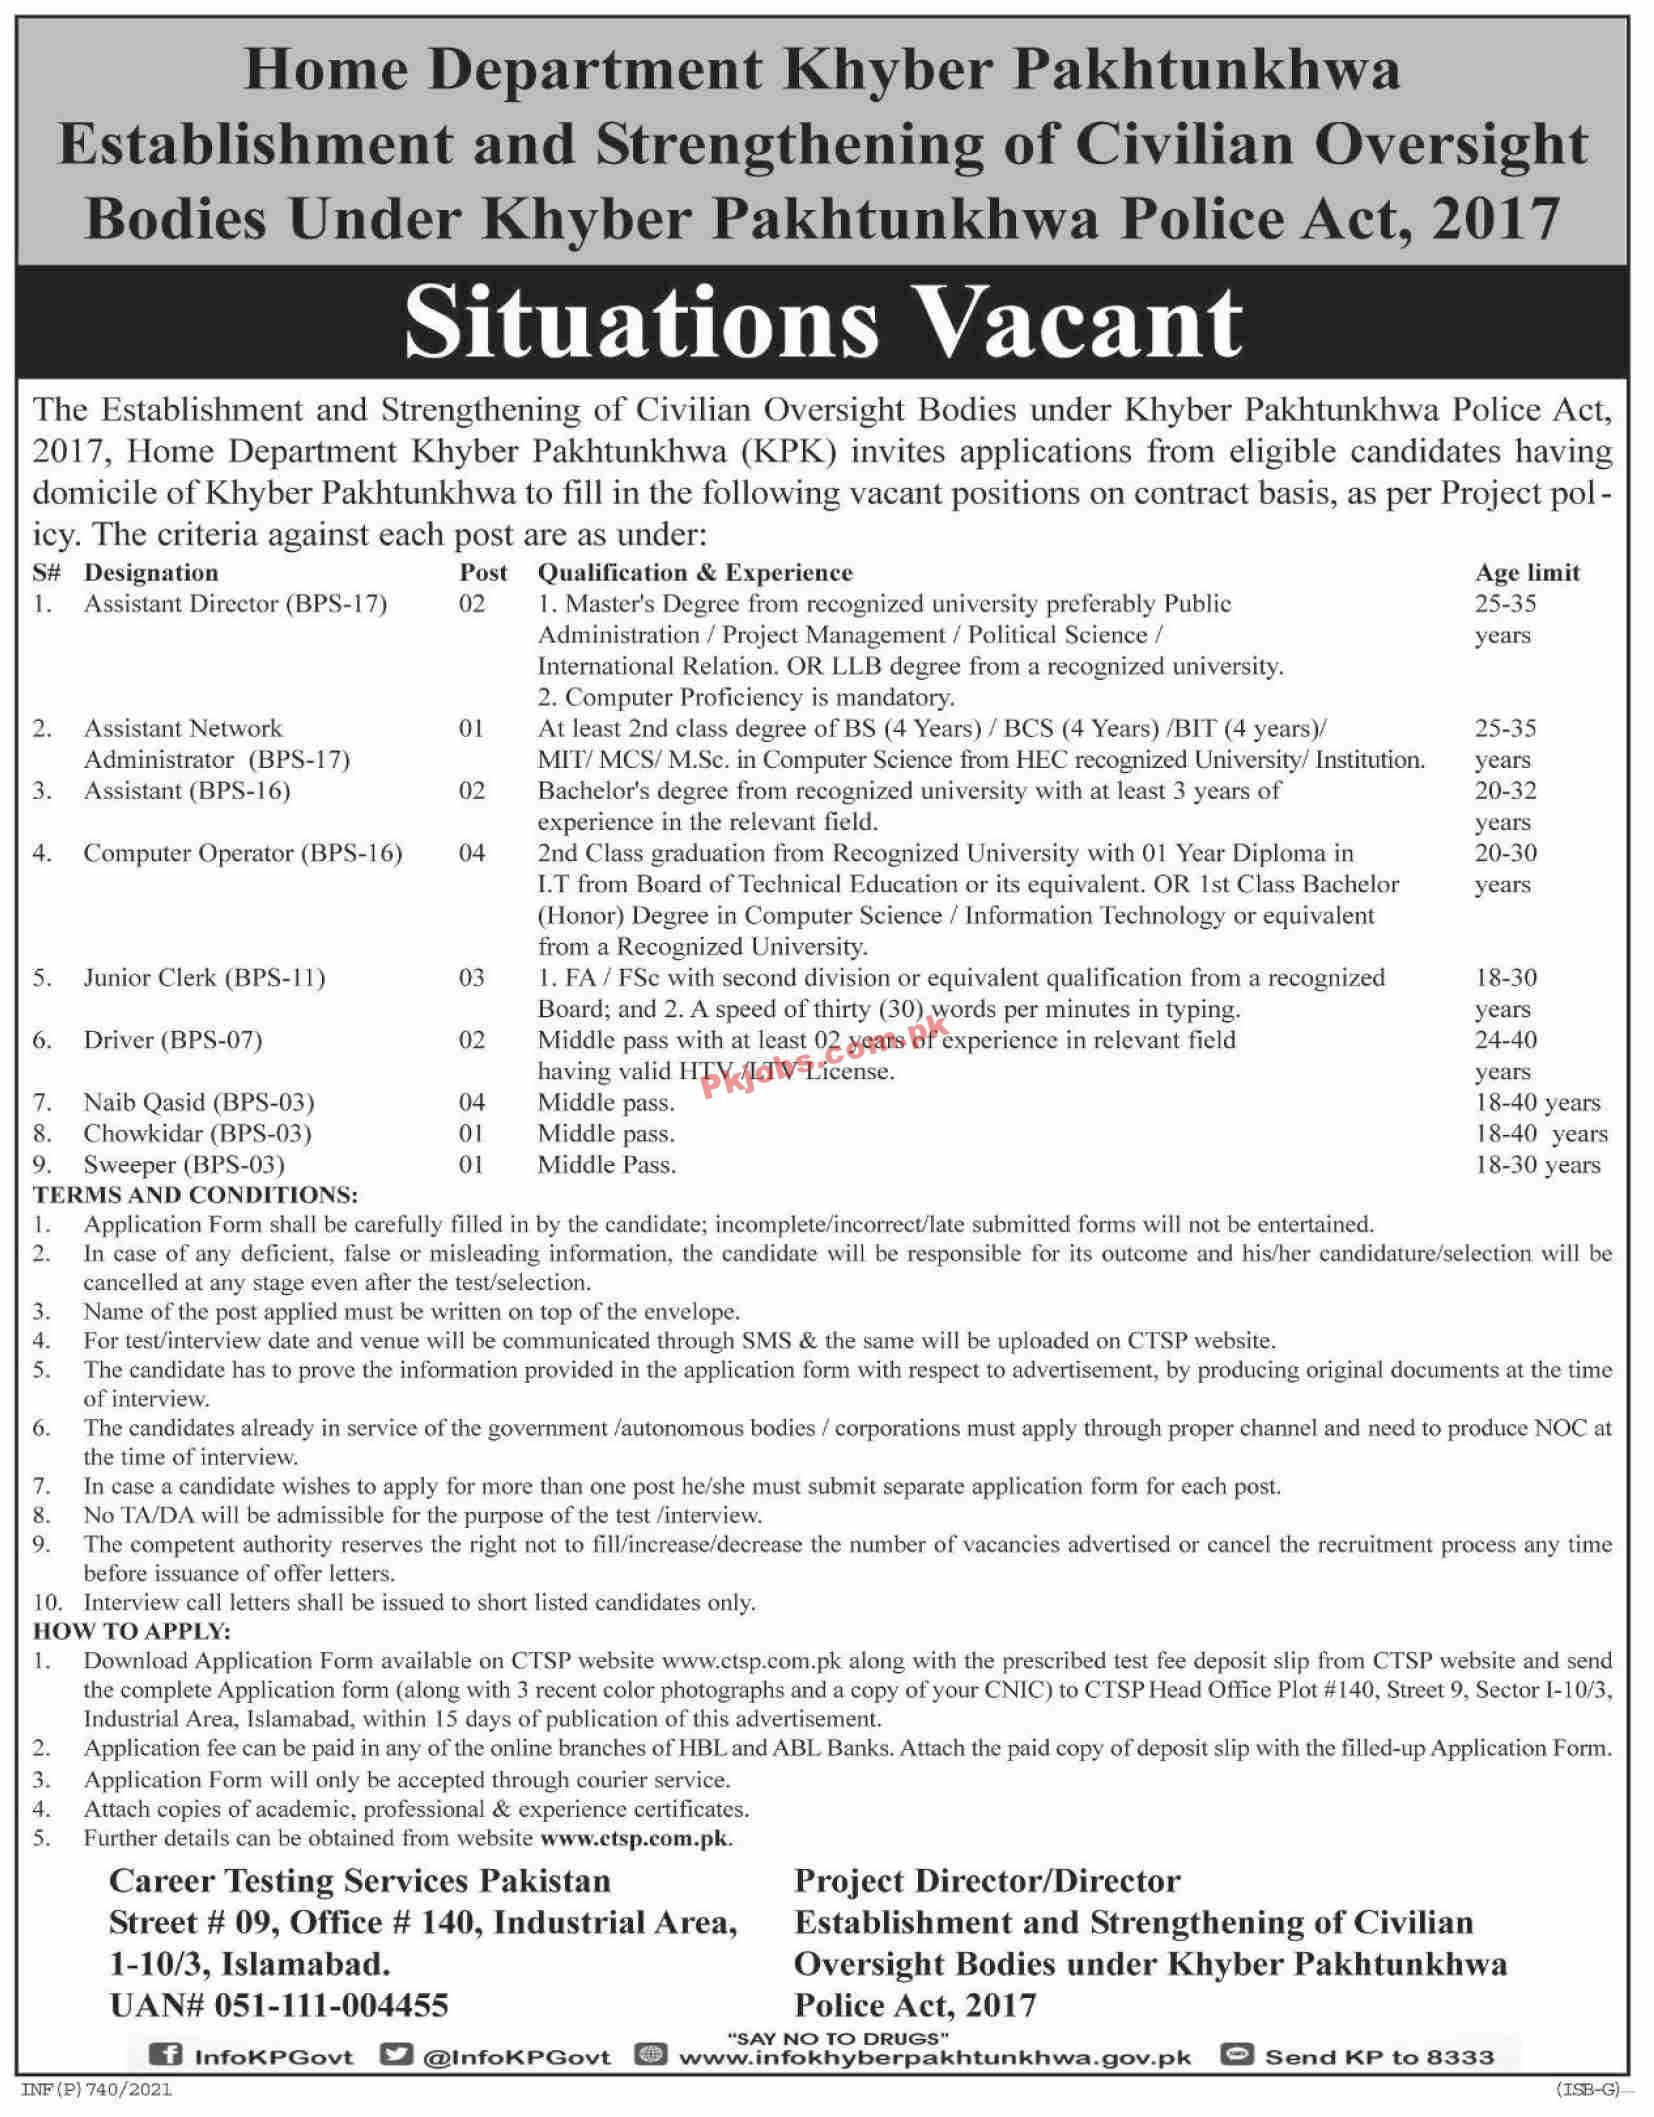 Jobs in Home Department Khyber Pakhtunkhwa